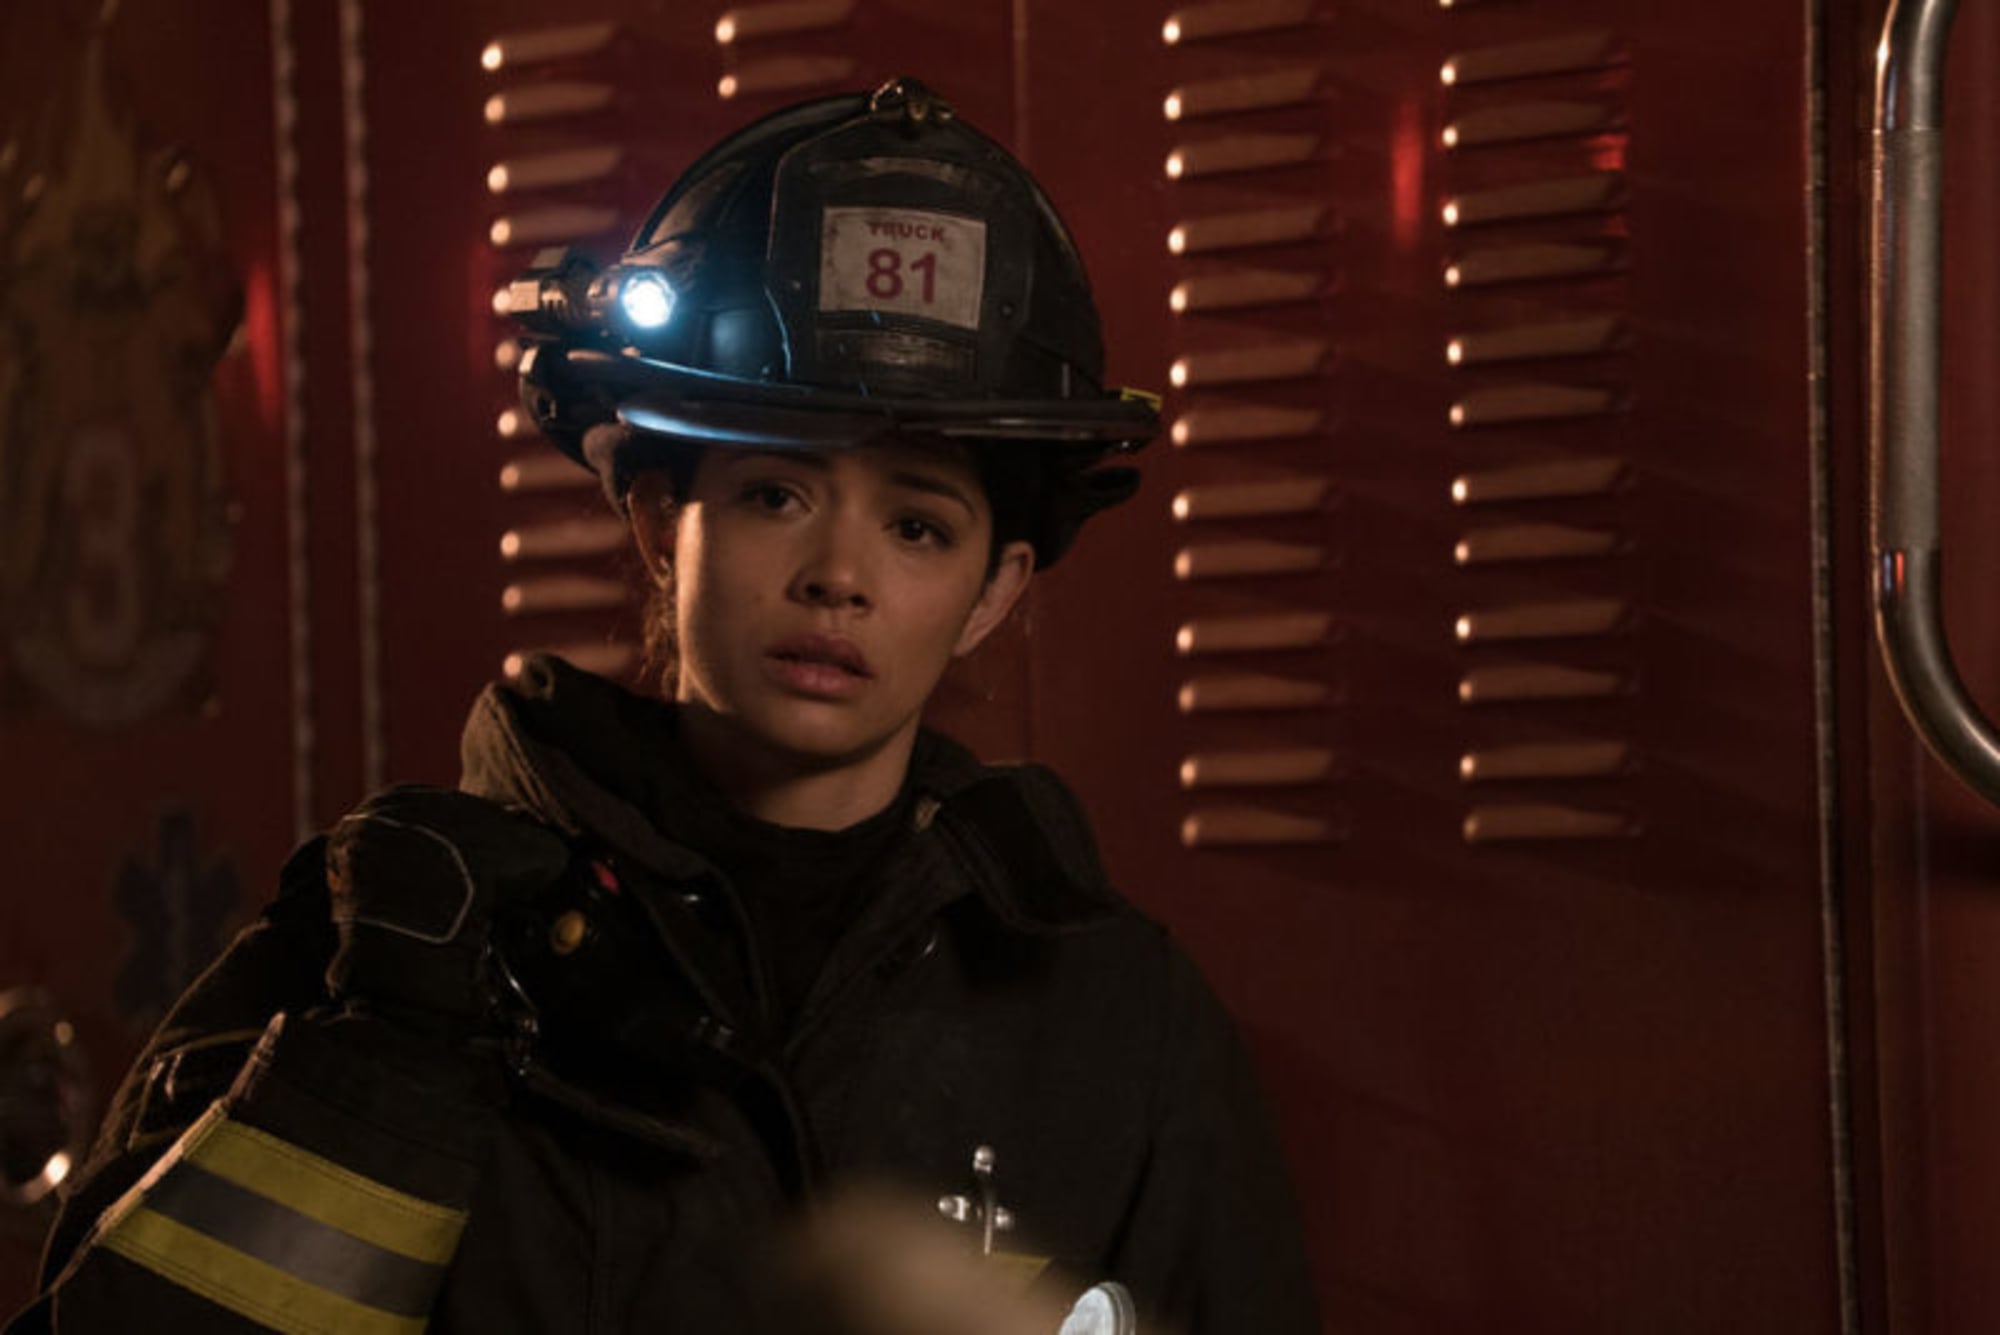 Chicago Fire Season 5 Episode 16 Synopsis Telling Her Goodbye